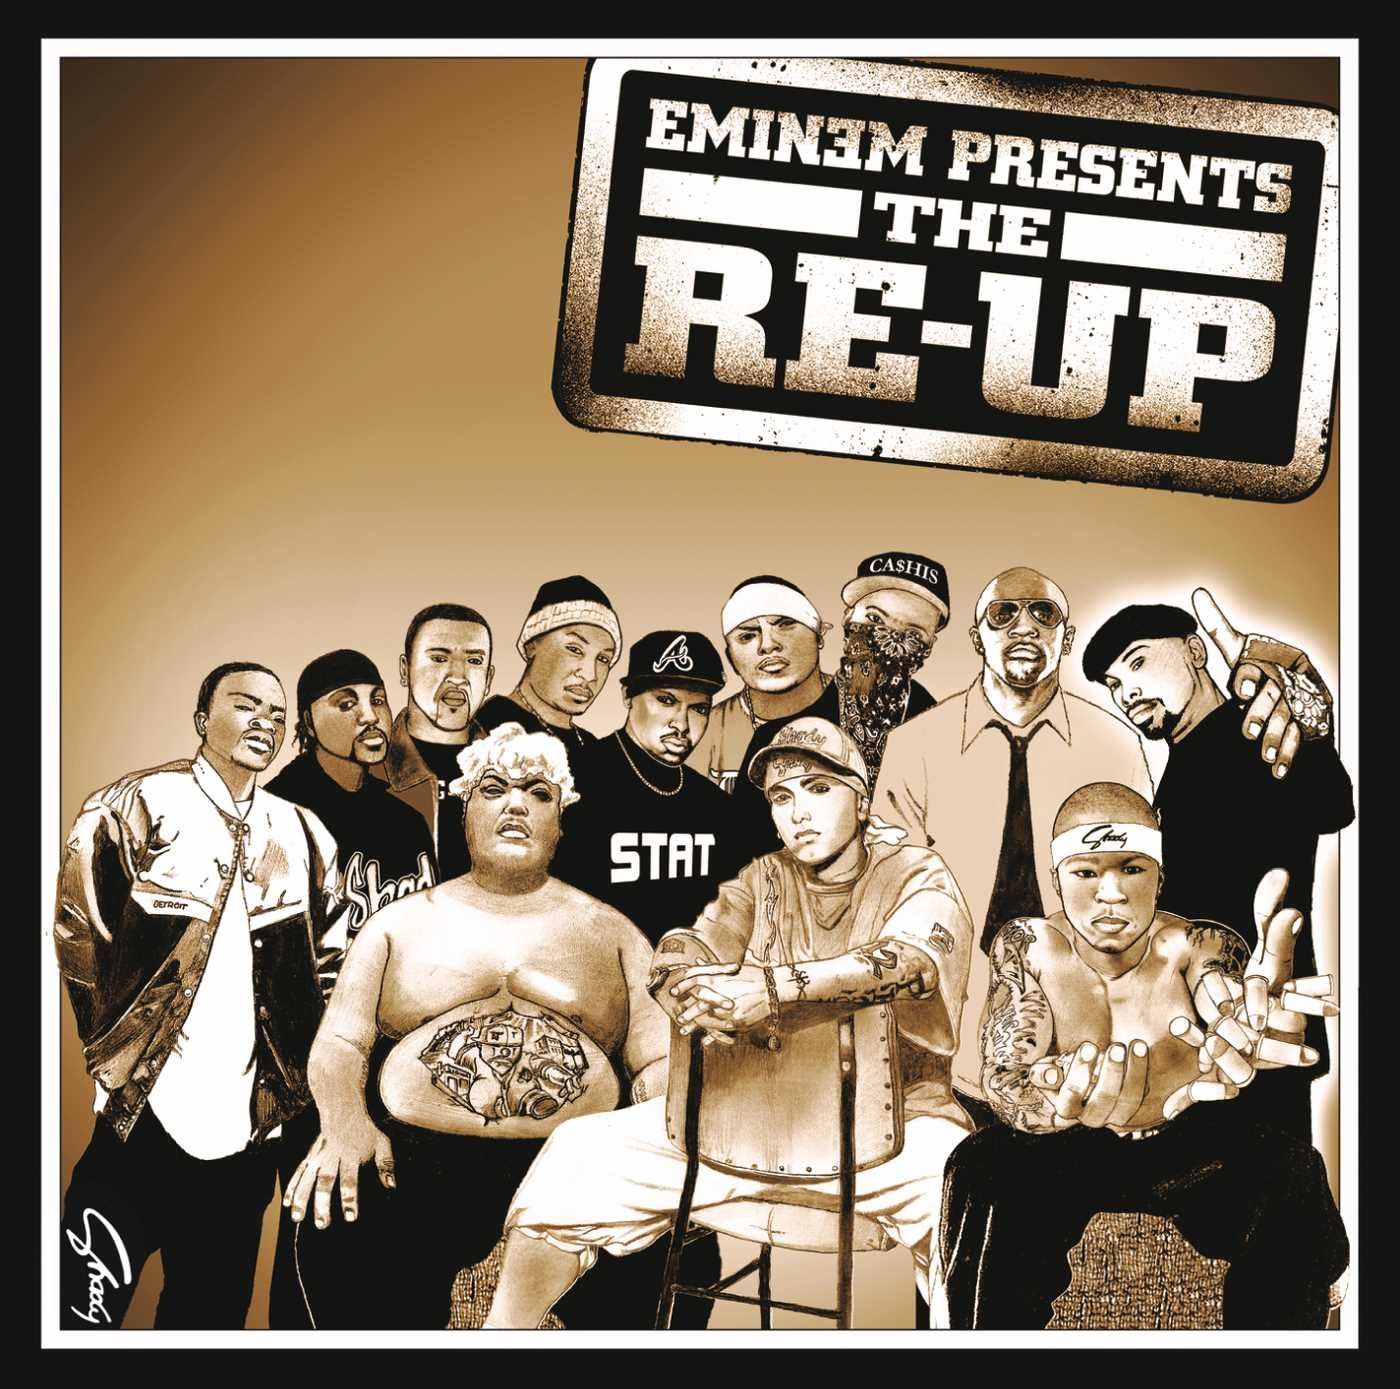 Album cover of "Eminem Presents: The Re-Up"